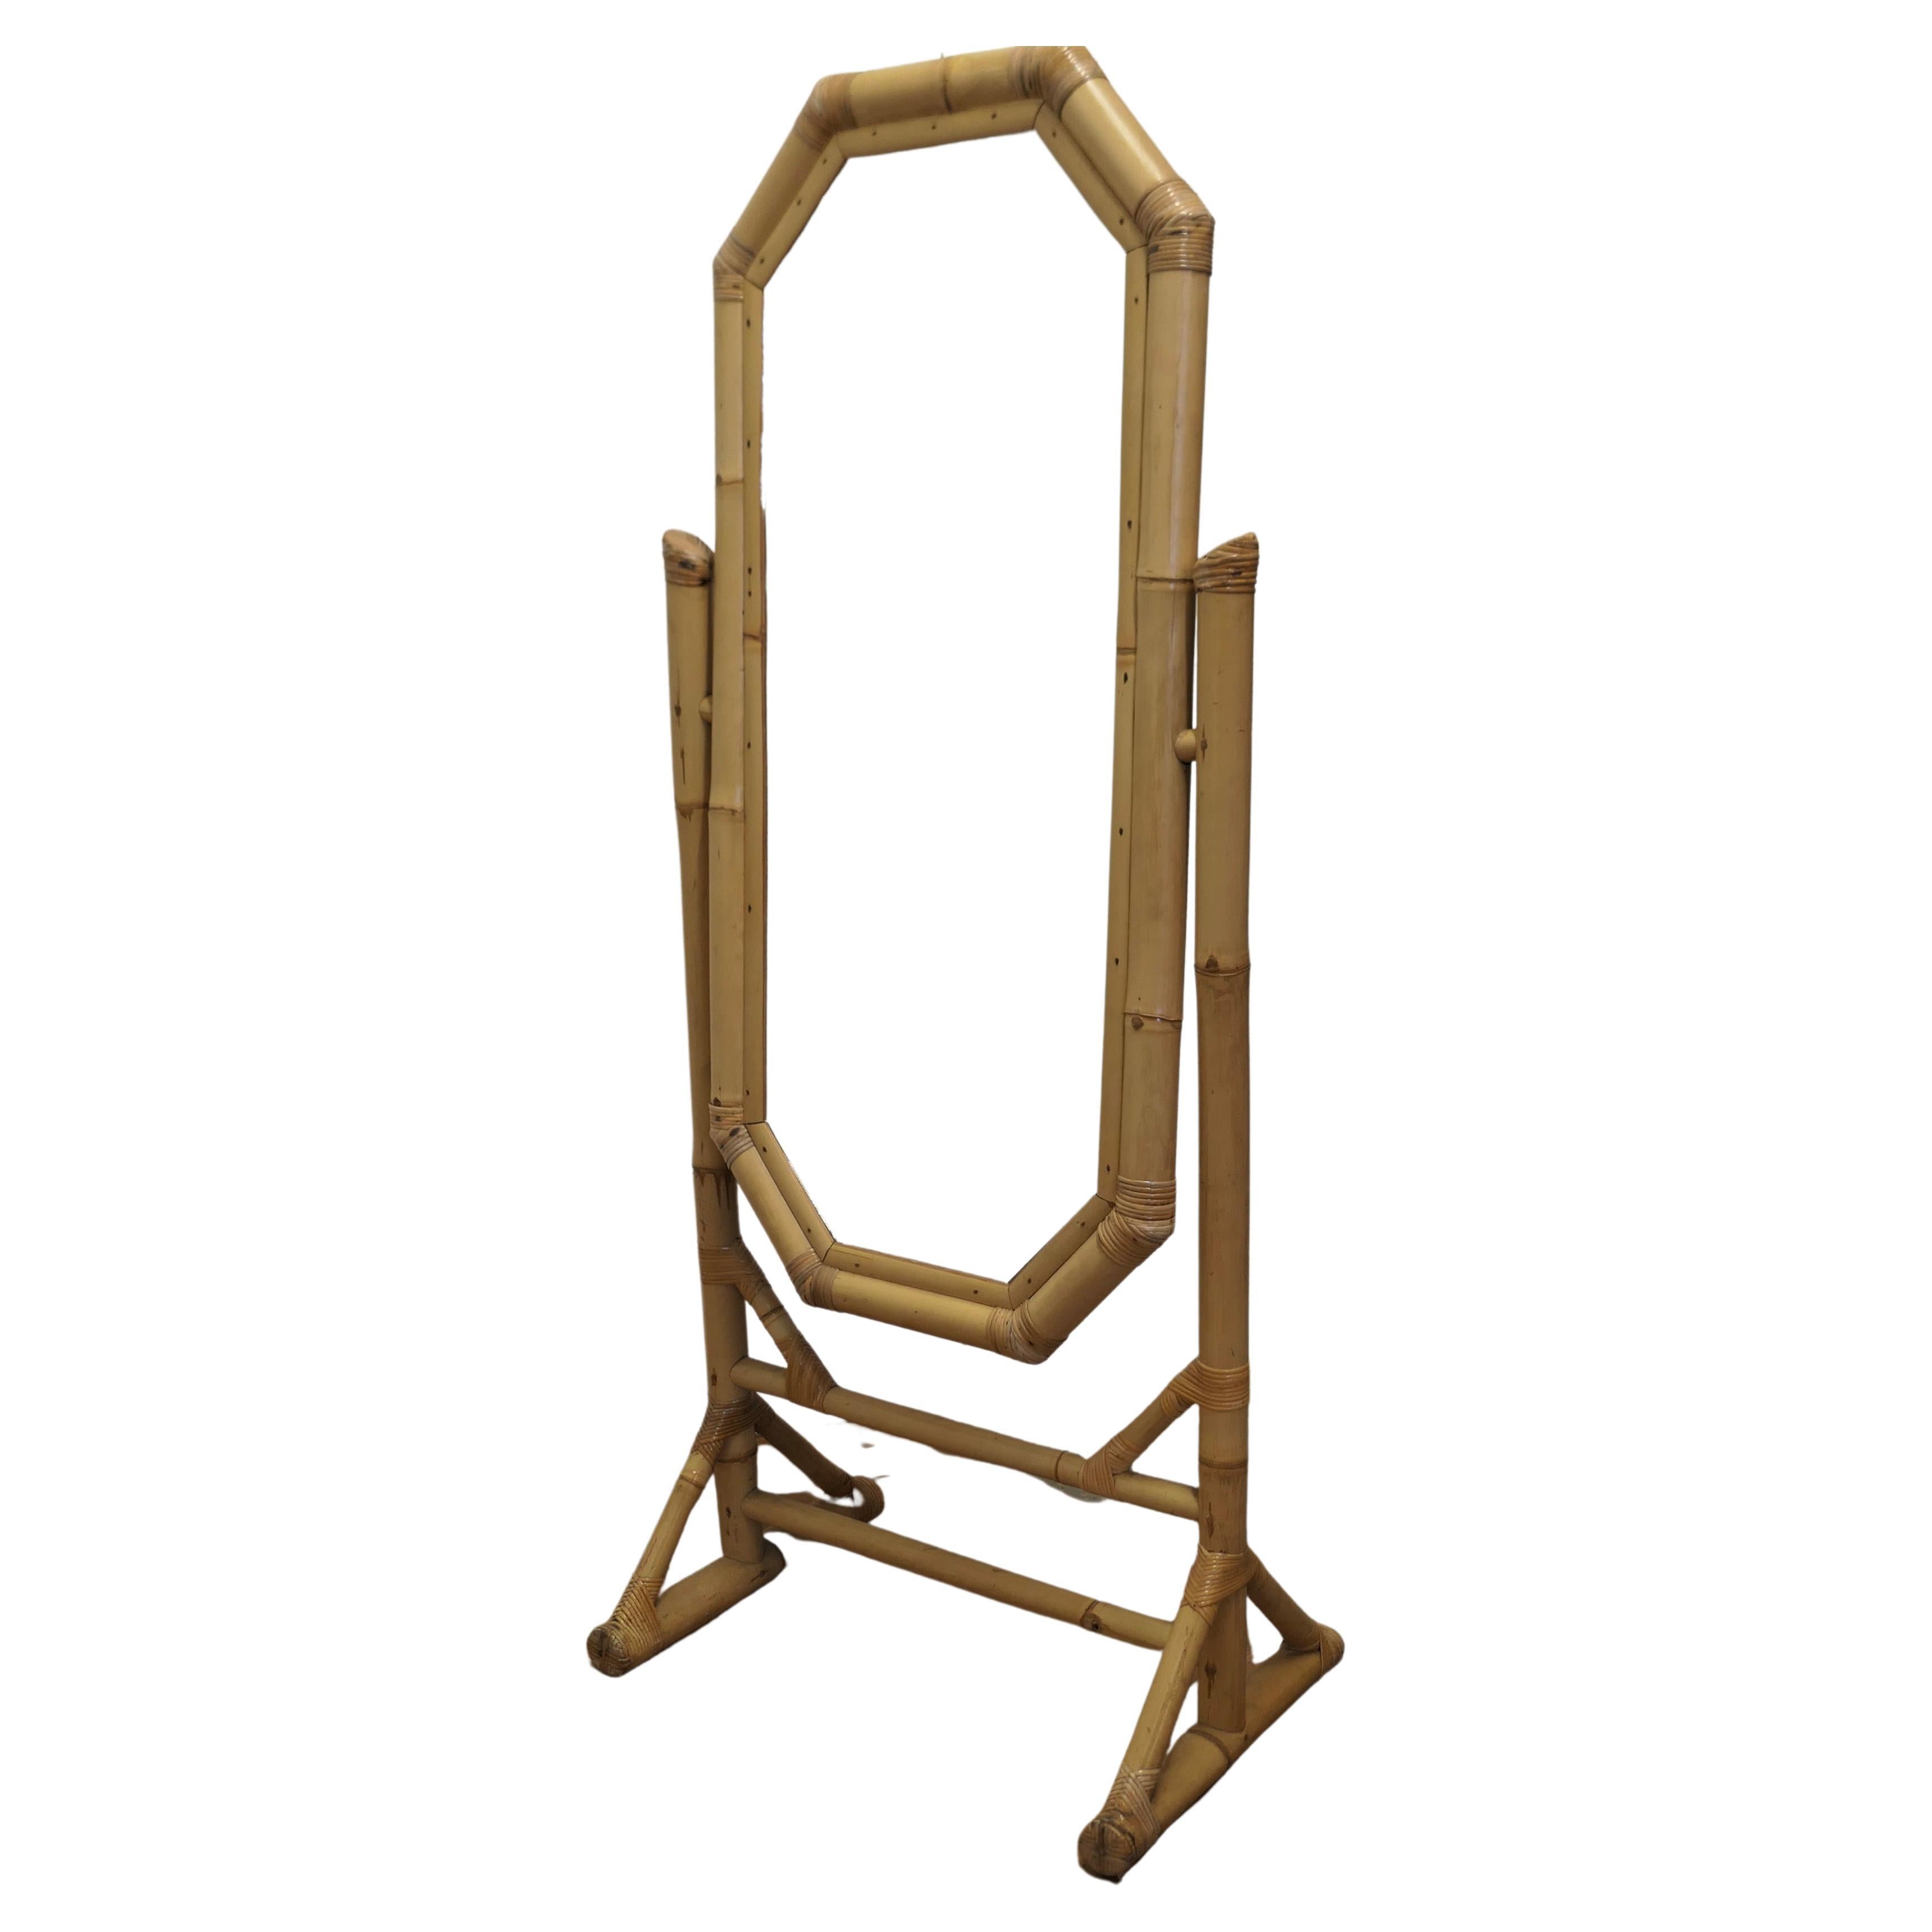 Art Deco Giant Bamboo Cheval Mirror
This is a very attractive piece, the tall mirror is framed with a wide bamboo frame, it mirror sits in a sturdy frame, the frame is also made in jumbo bamboo and the legs have a broad base for storage
The mirror